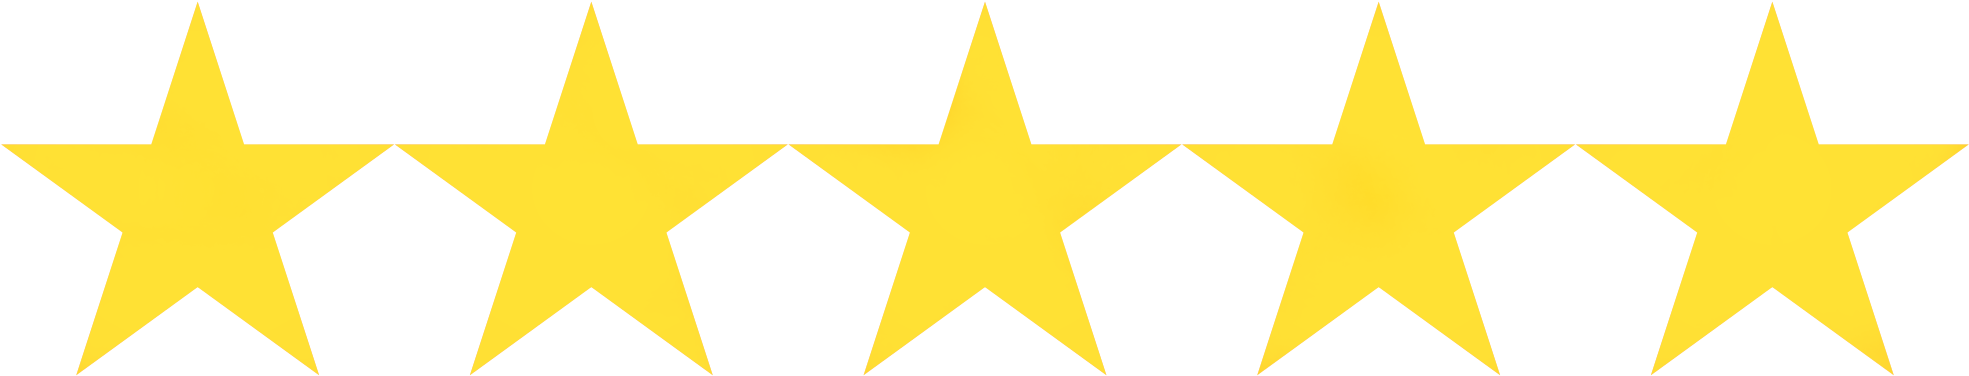 https://xionlab.com/wp-content/uploads/2022/02/207-2073846_5star-5-star-png-icon.png